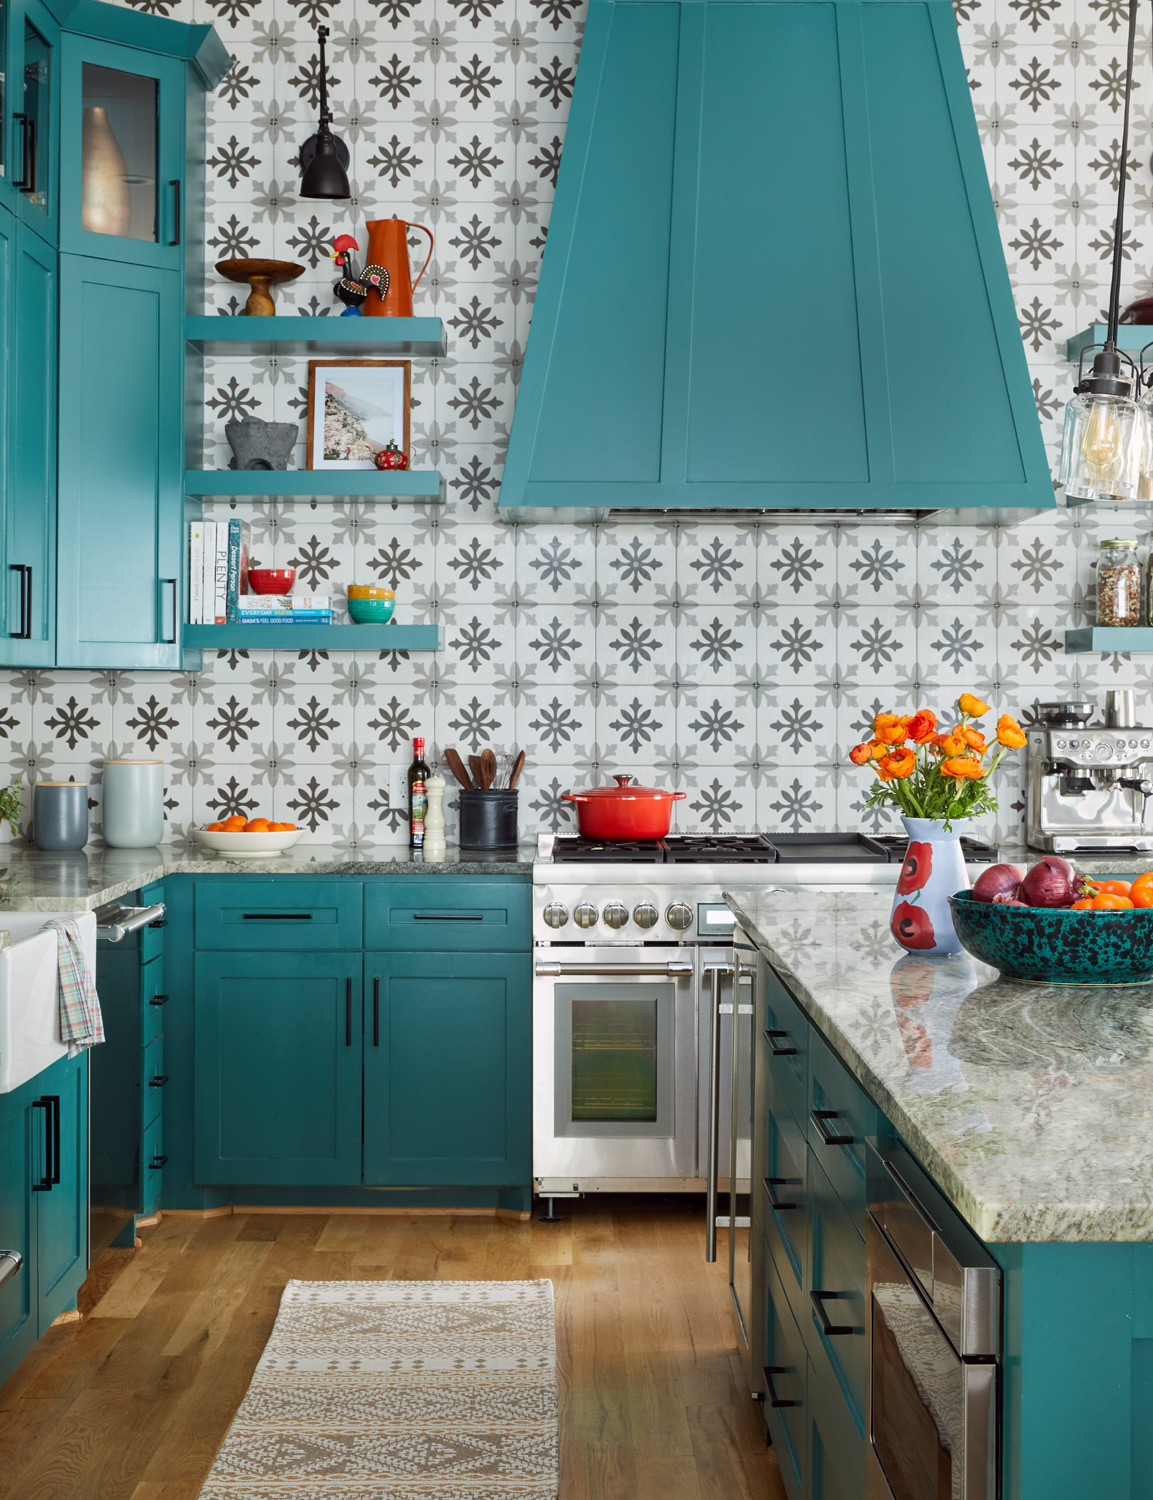 Kitchen for HGTV photographed by interior photographer Buff Strickland